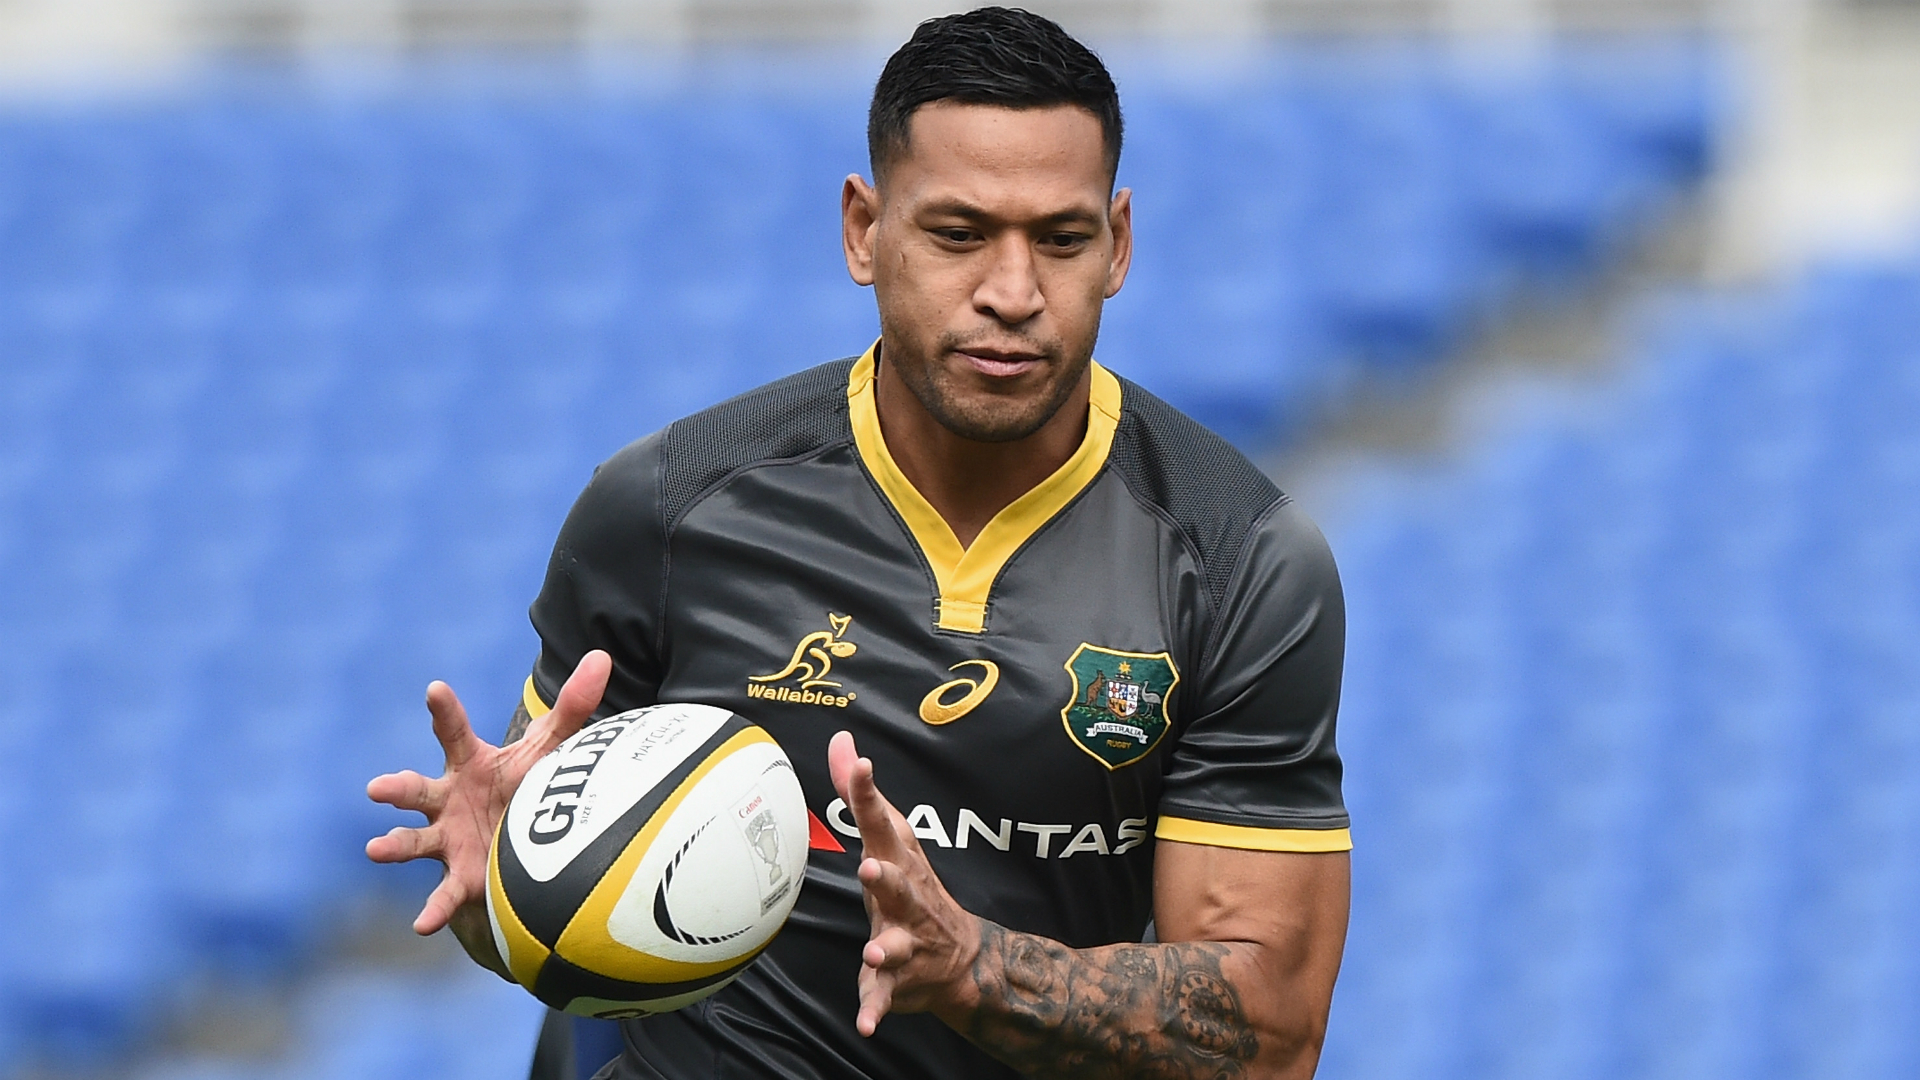 A new campaign – 'Religious Freedom' – has been set up to help raise money for Israel Folau's legal battle against Rugby Australia.